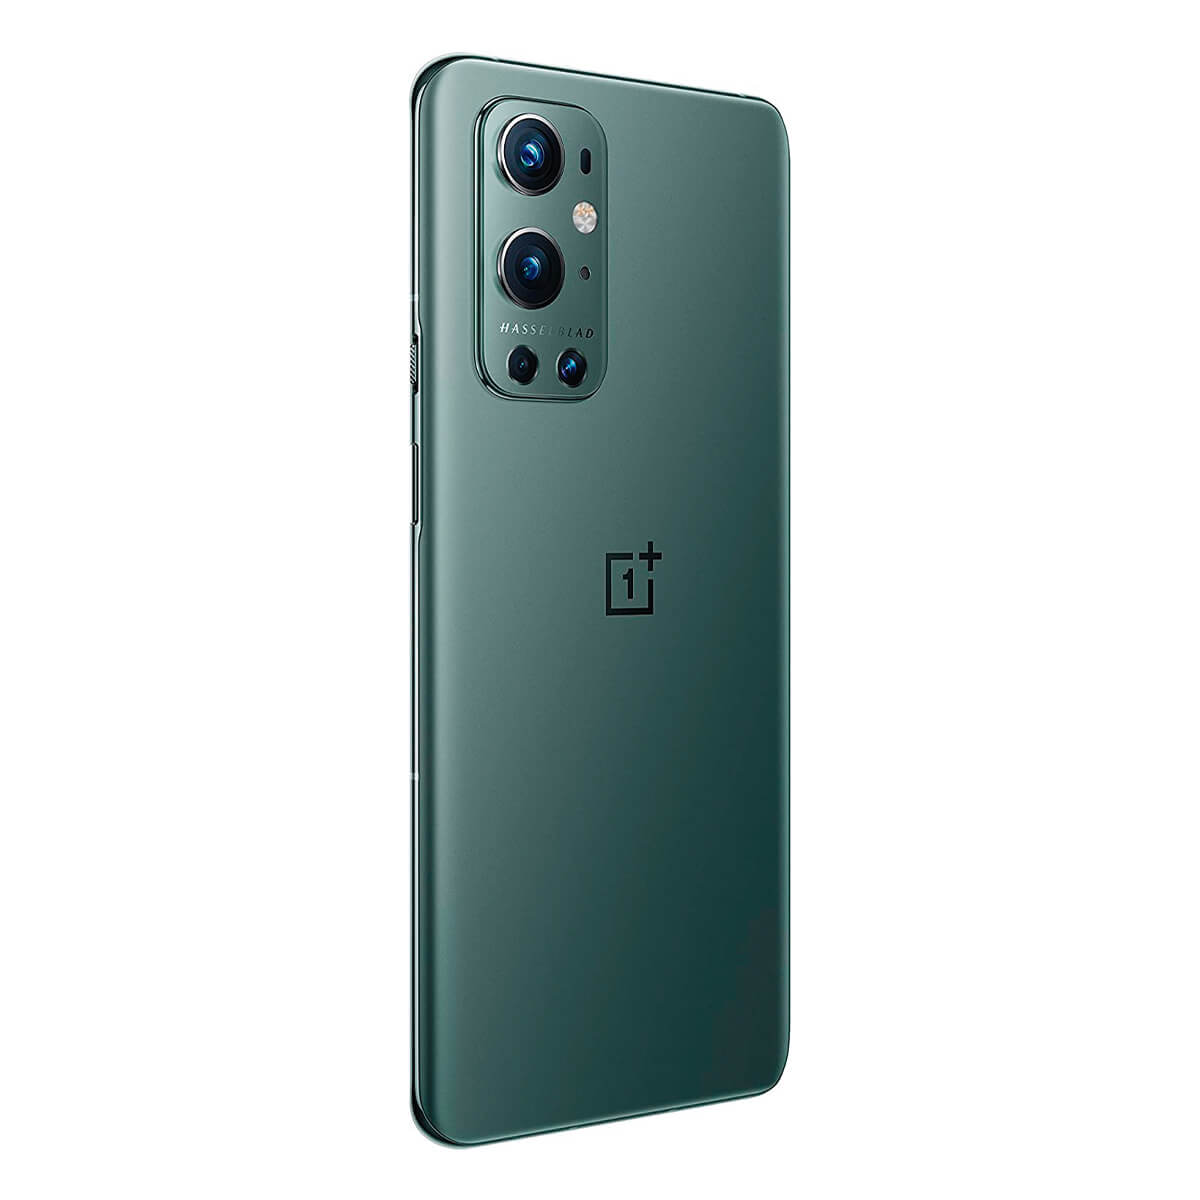 ONEPLUS 9 PRO 5G 8GB/128GB VERDE (FOREST GREEN) DUAL SIM | Móviles libres